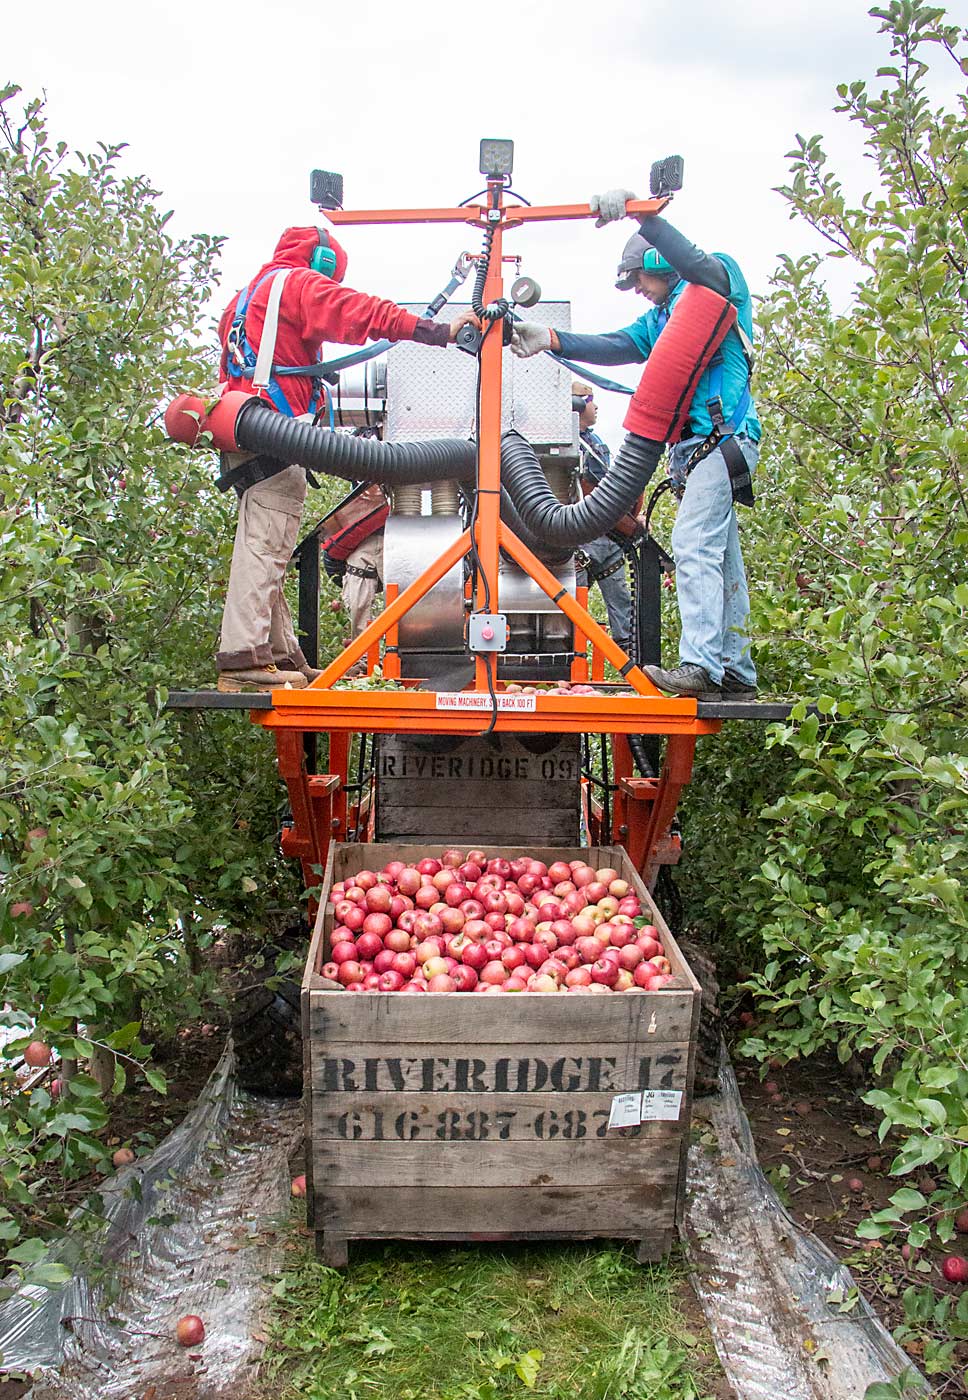 The man on the right lowers a full bin of Fujis from the Bandit Cyclone at a Riveridge Produce Marketing orchard. Full bins are deposited out the back of the machine, which picks up empty bins from the front. (Matt Milkovich/Good Fruit Grower)